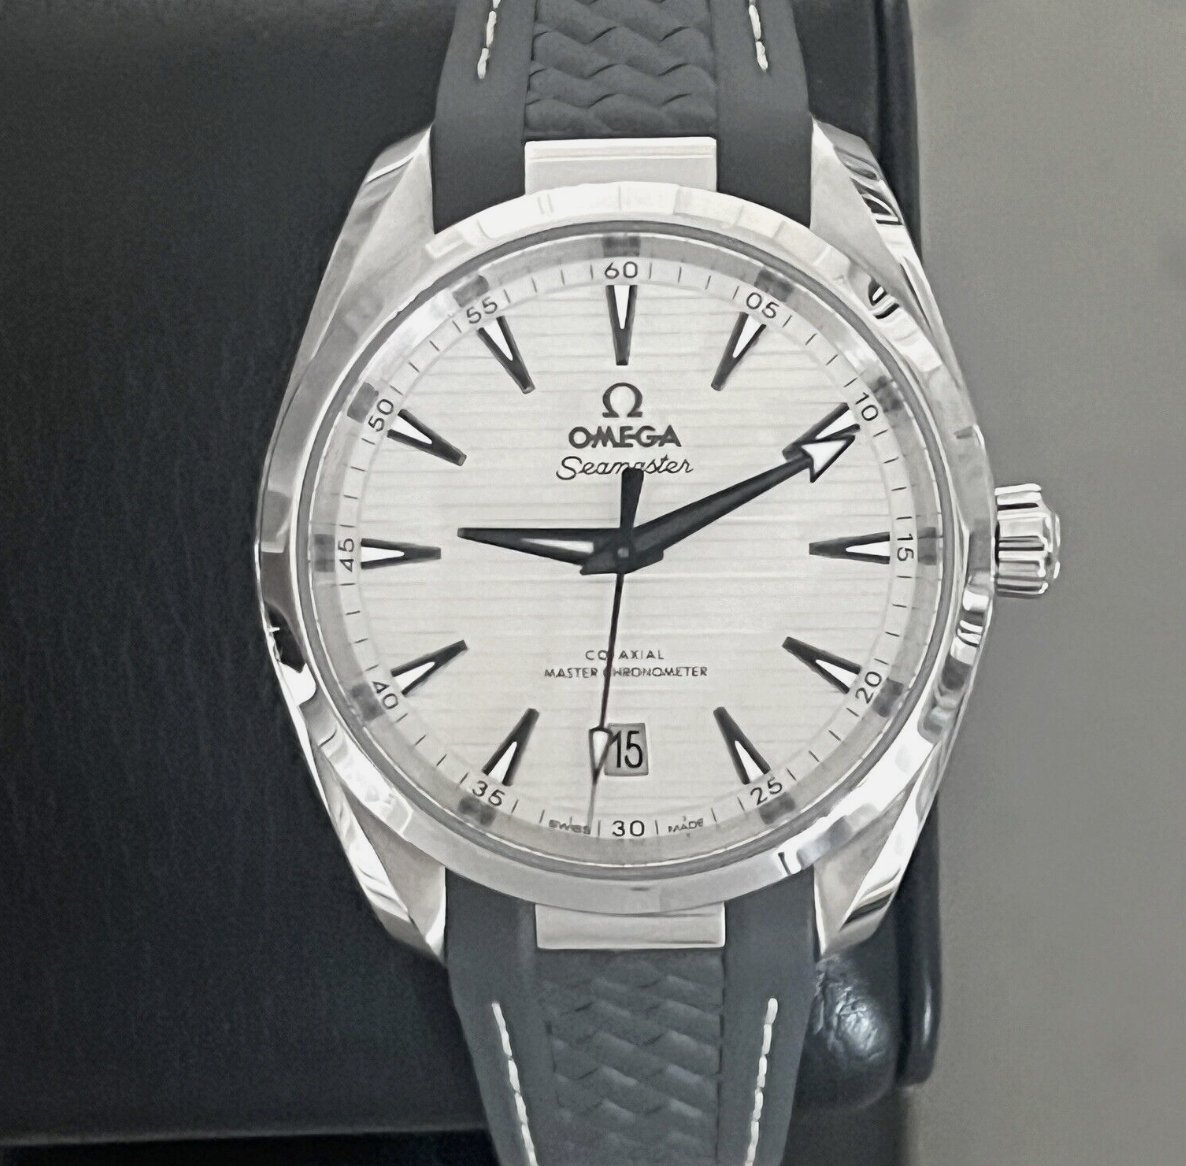 Omega Aqua Terra 38mm 220.12.38.20.02.001 (Full Set With Extra OEM Strap)

For sale by @refinedhorology

$4,950

#omega #watches #valueyourwatch #watchmarketplace #luxury #luxurylife #entrereneur #luxurywatch #luxurywatches #luxurydesign #businesswatch #watchfam